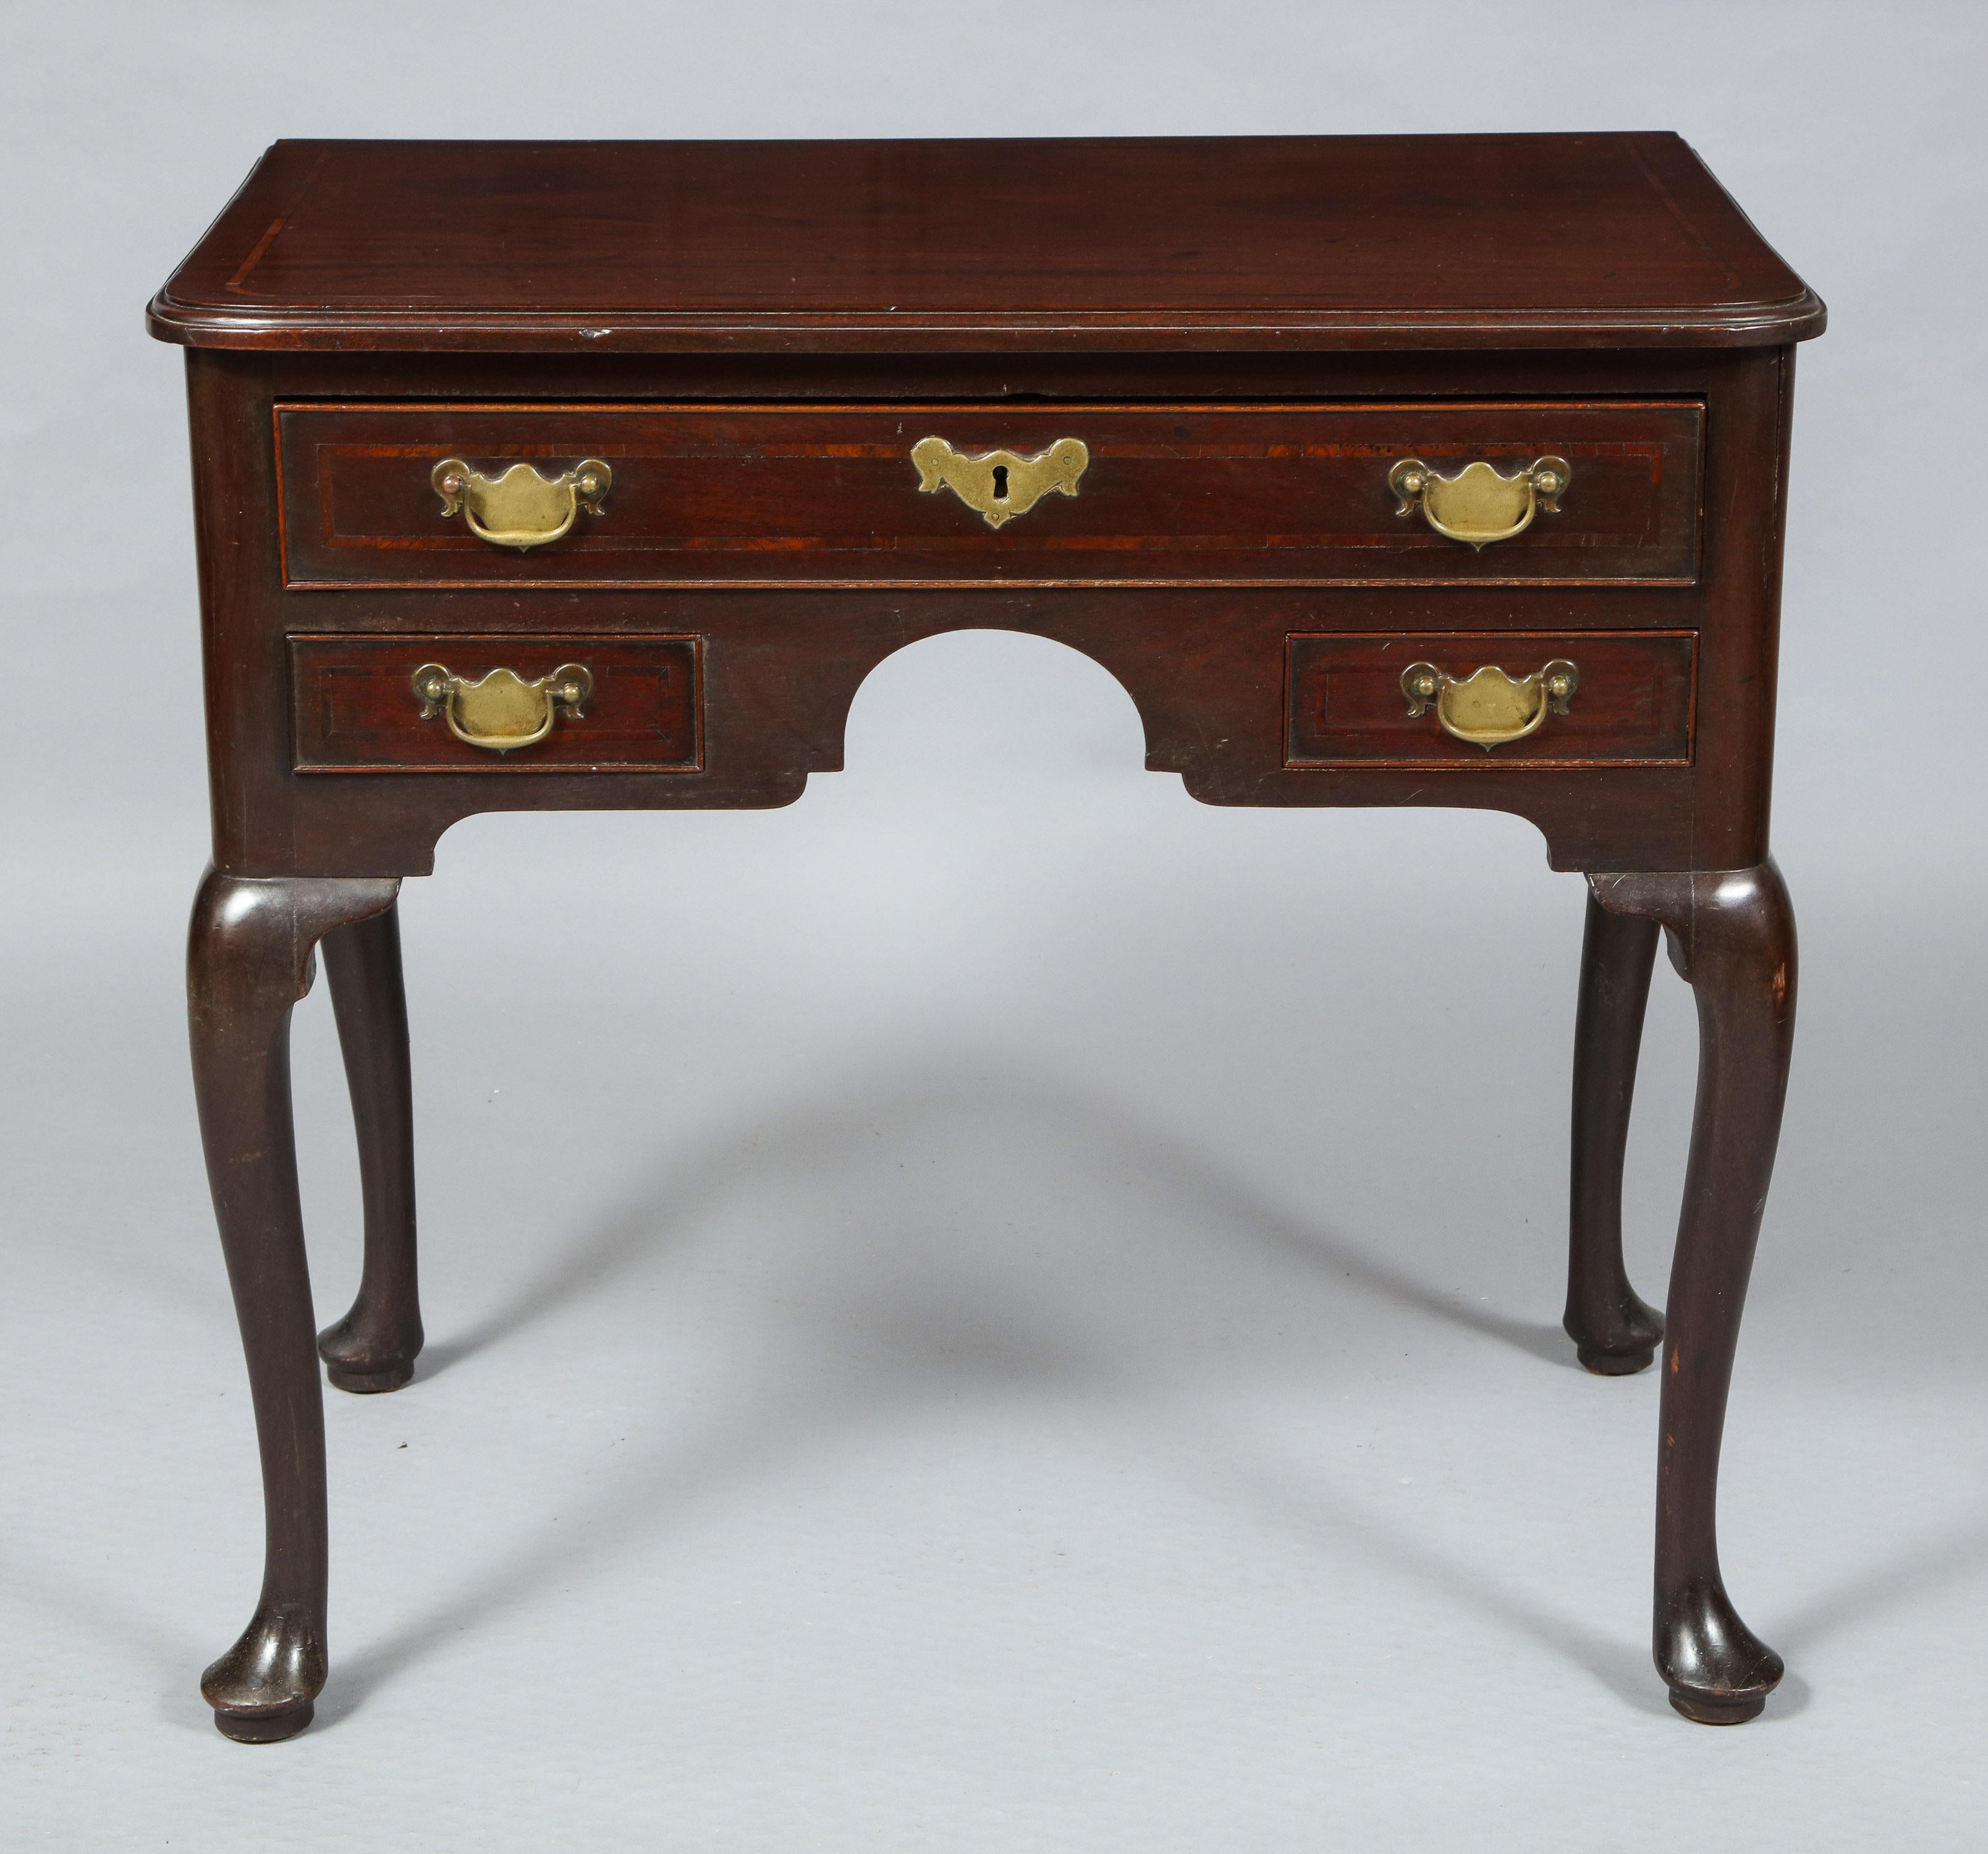 A very good Georgian mahogany Lowboy made from very dense Cuban mahogany, the shaped top with molded edge and narrow crossbanding, over on long and two short drawers with similar banding and retaining original brass hardware, standing on cabriole